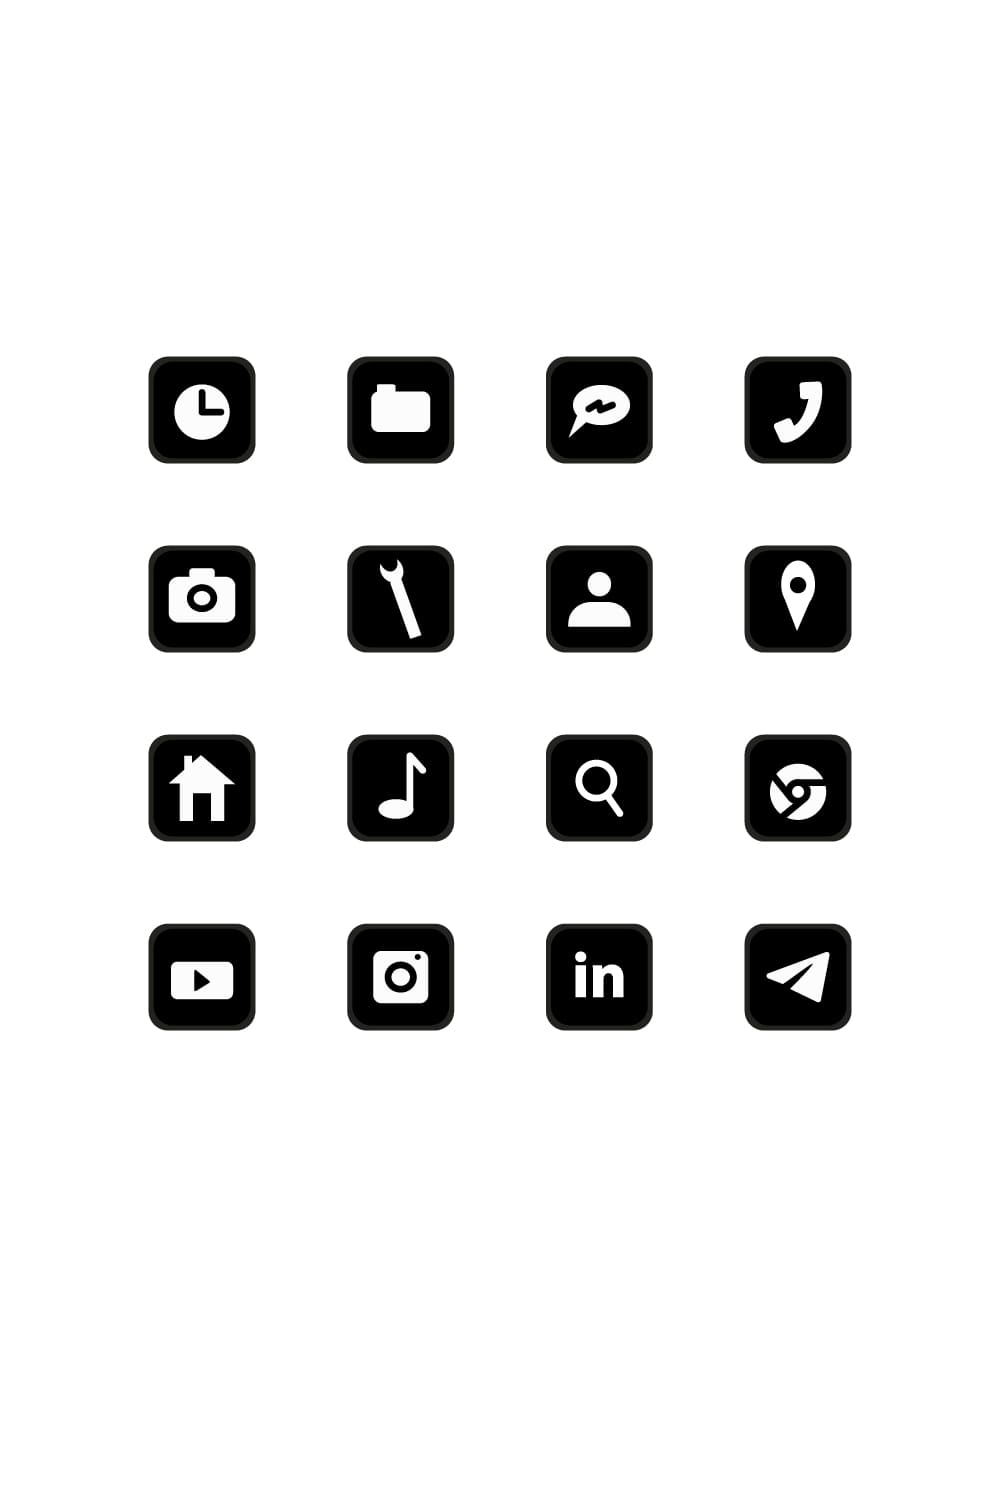 Free Black and White Icons.